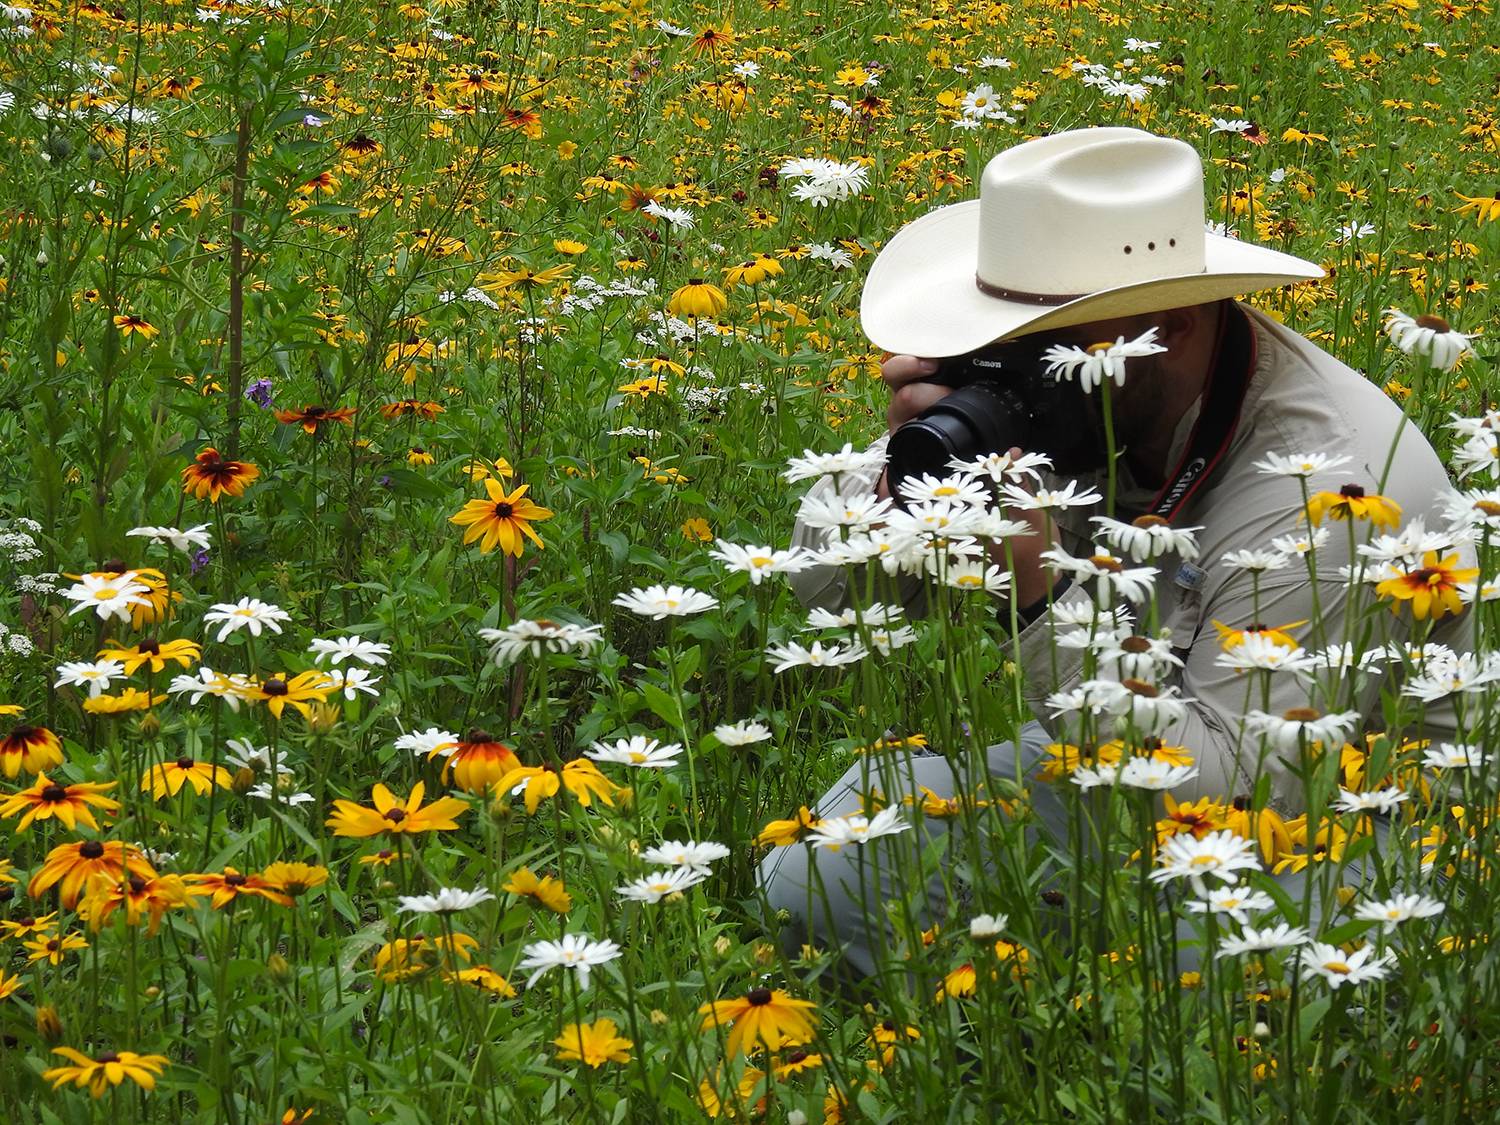 Matthew McGeary in a field of flowers photographing a bumblebee